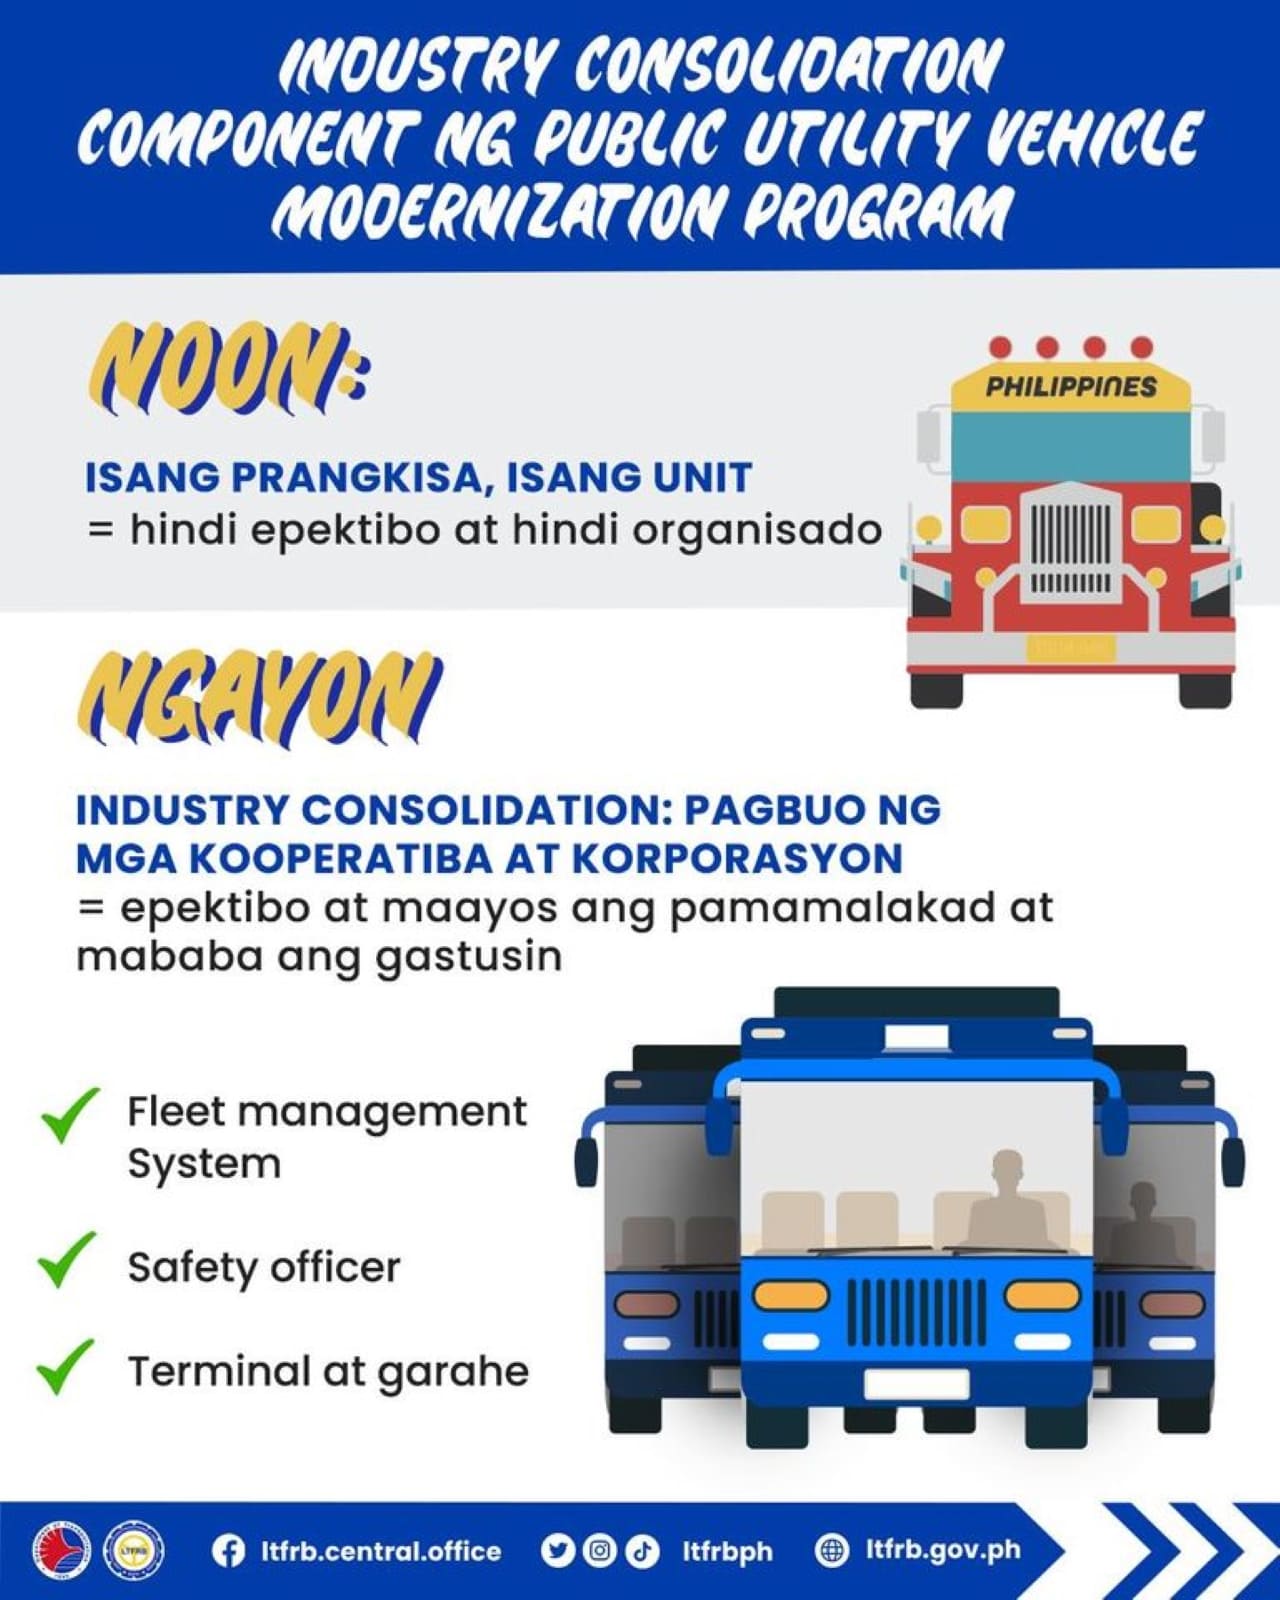 Ltfrb Dotr Puvmp Industry Consolidation Component Inline 02 Min